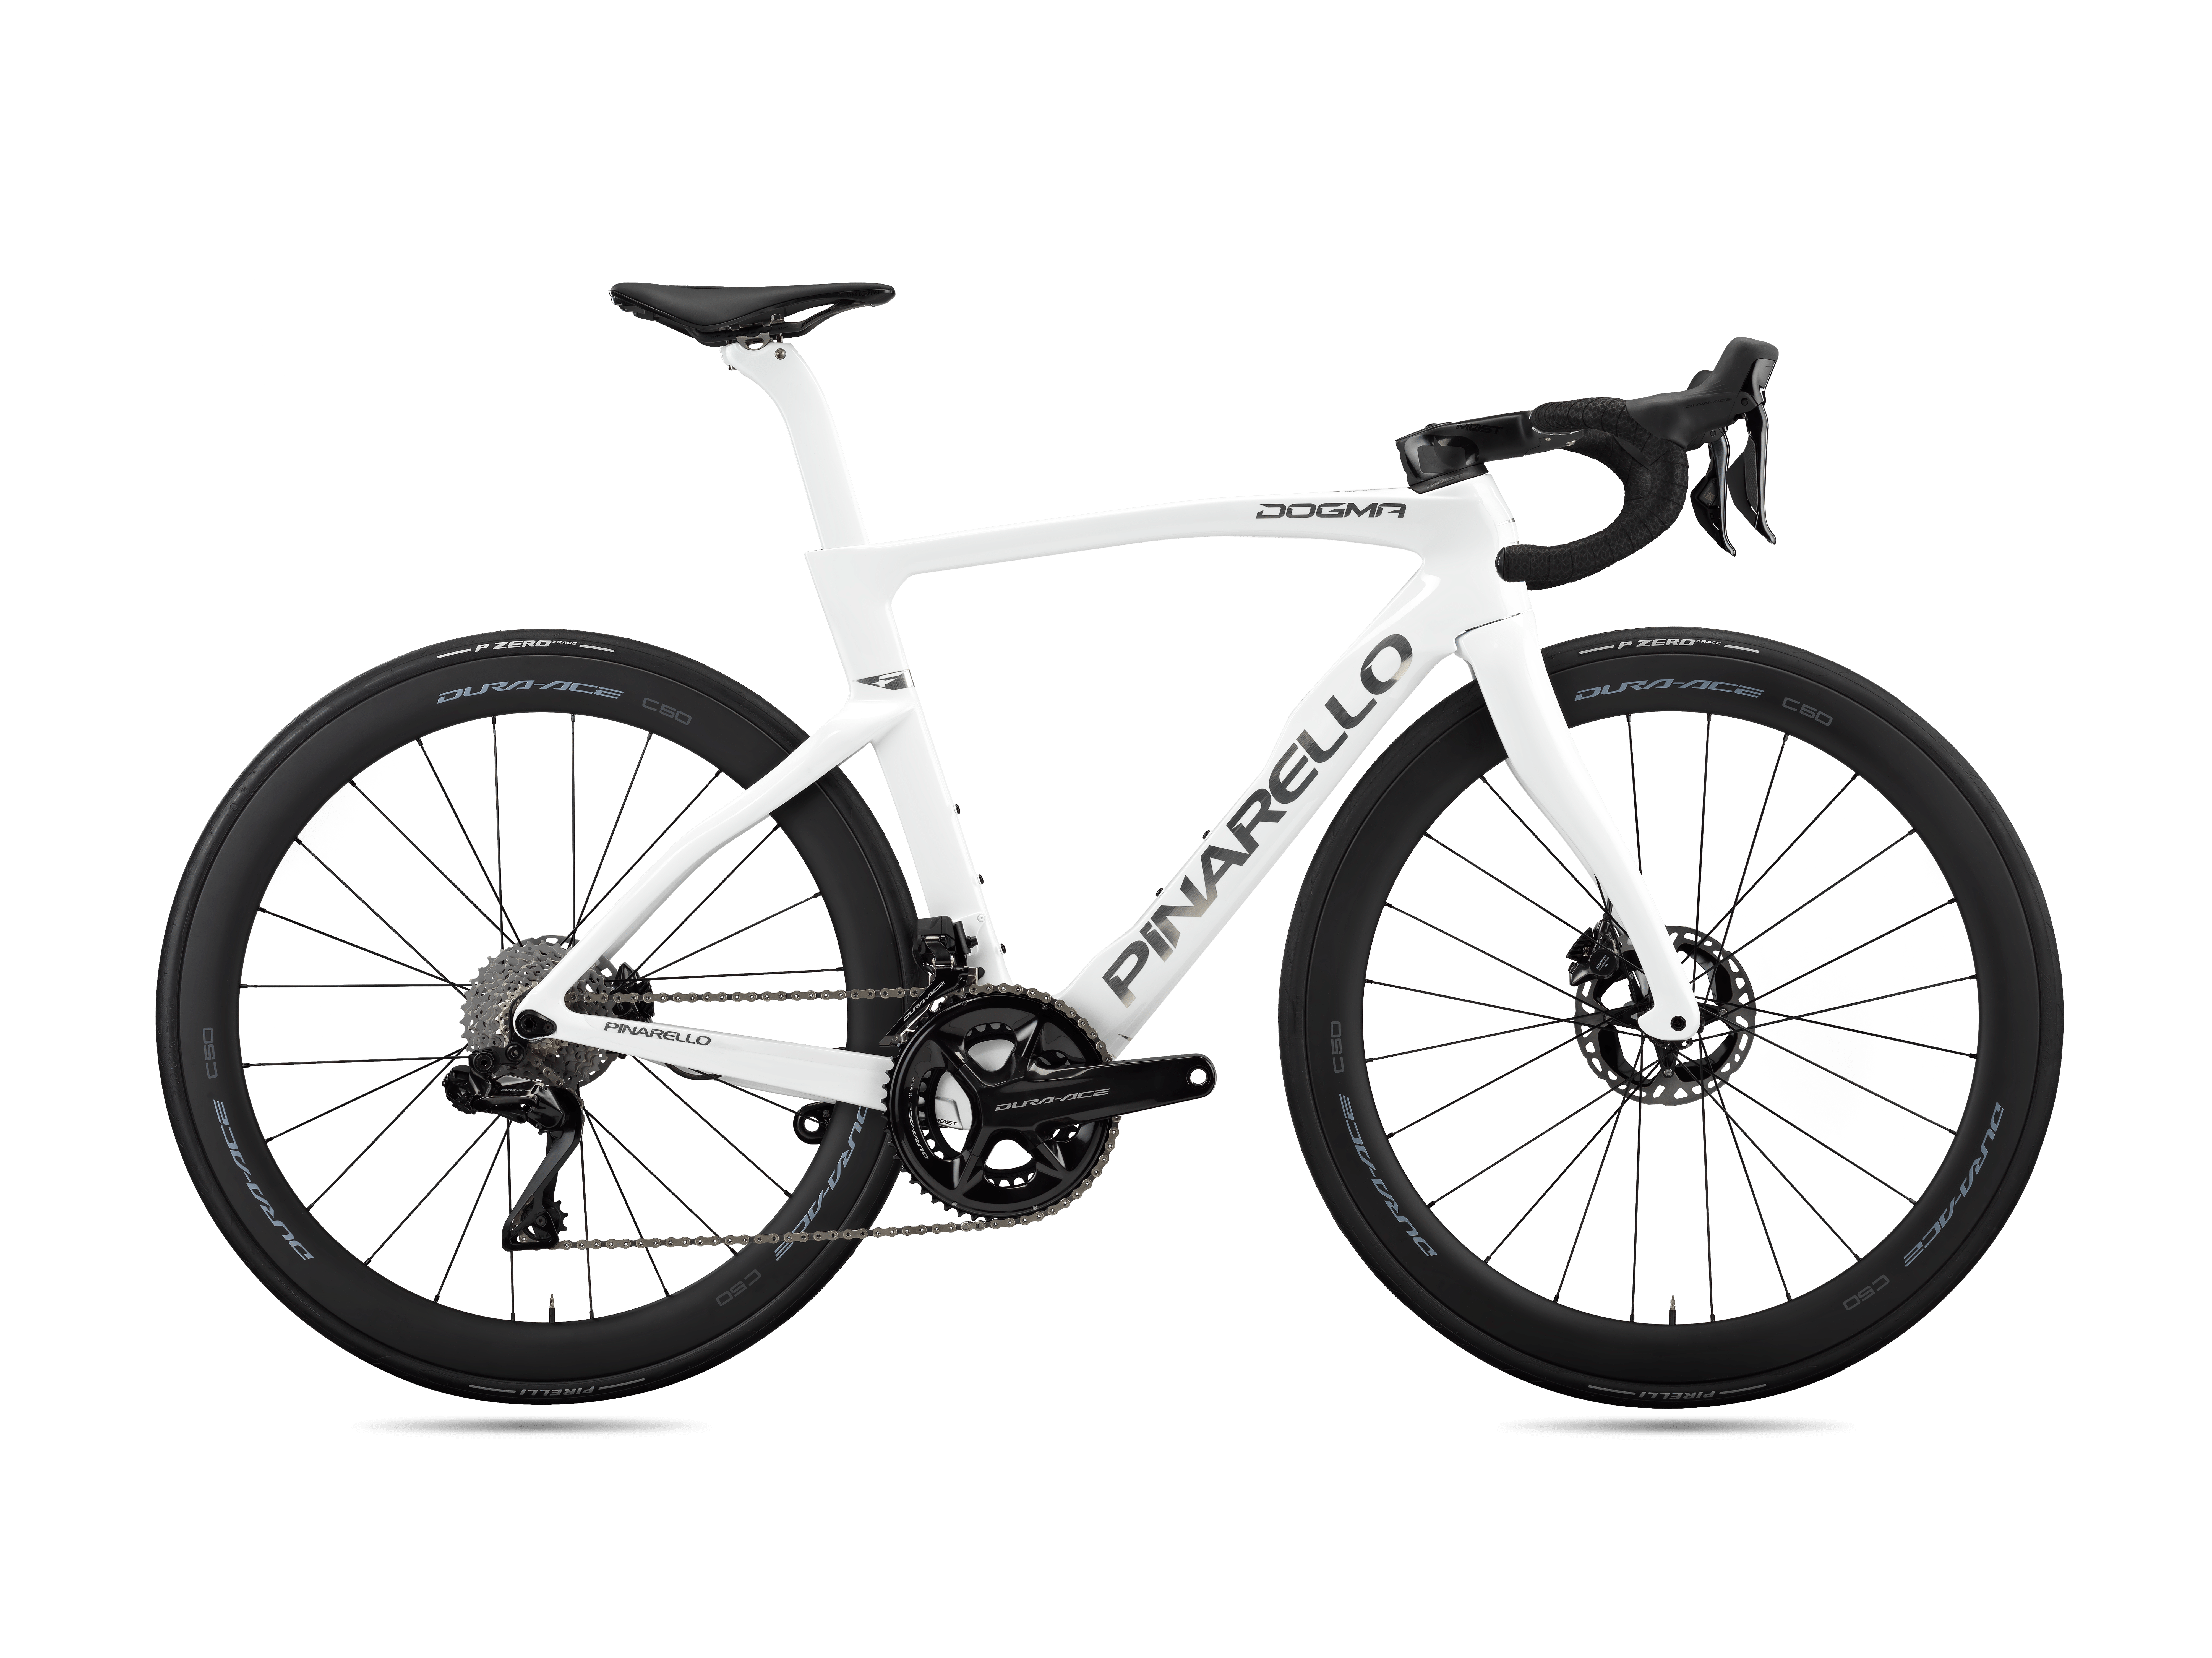 White Pinarello Dogma F with Shimano Dura-Ace Di2 groupset and Dura-Ace 50mm carbon wheels.